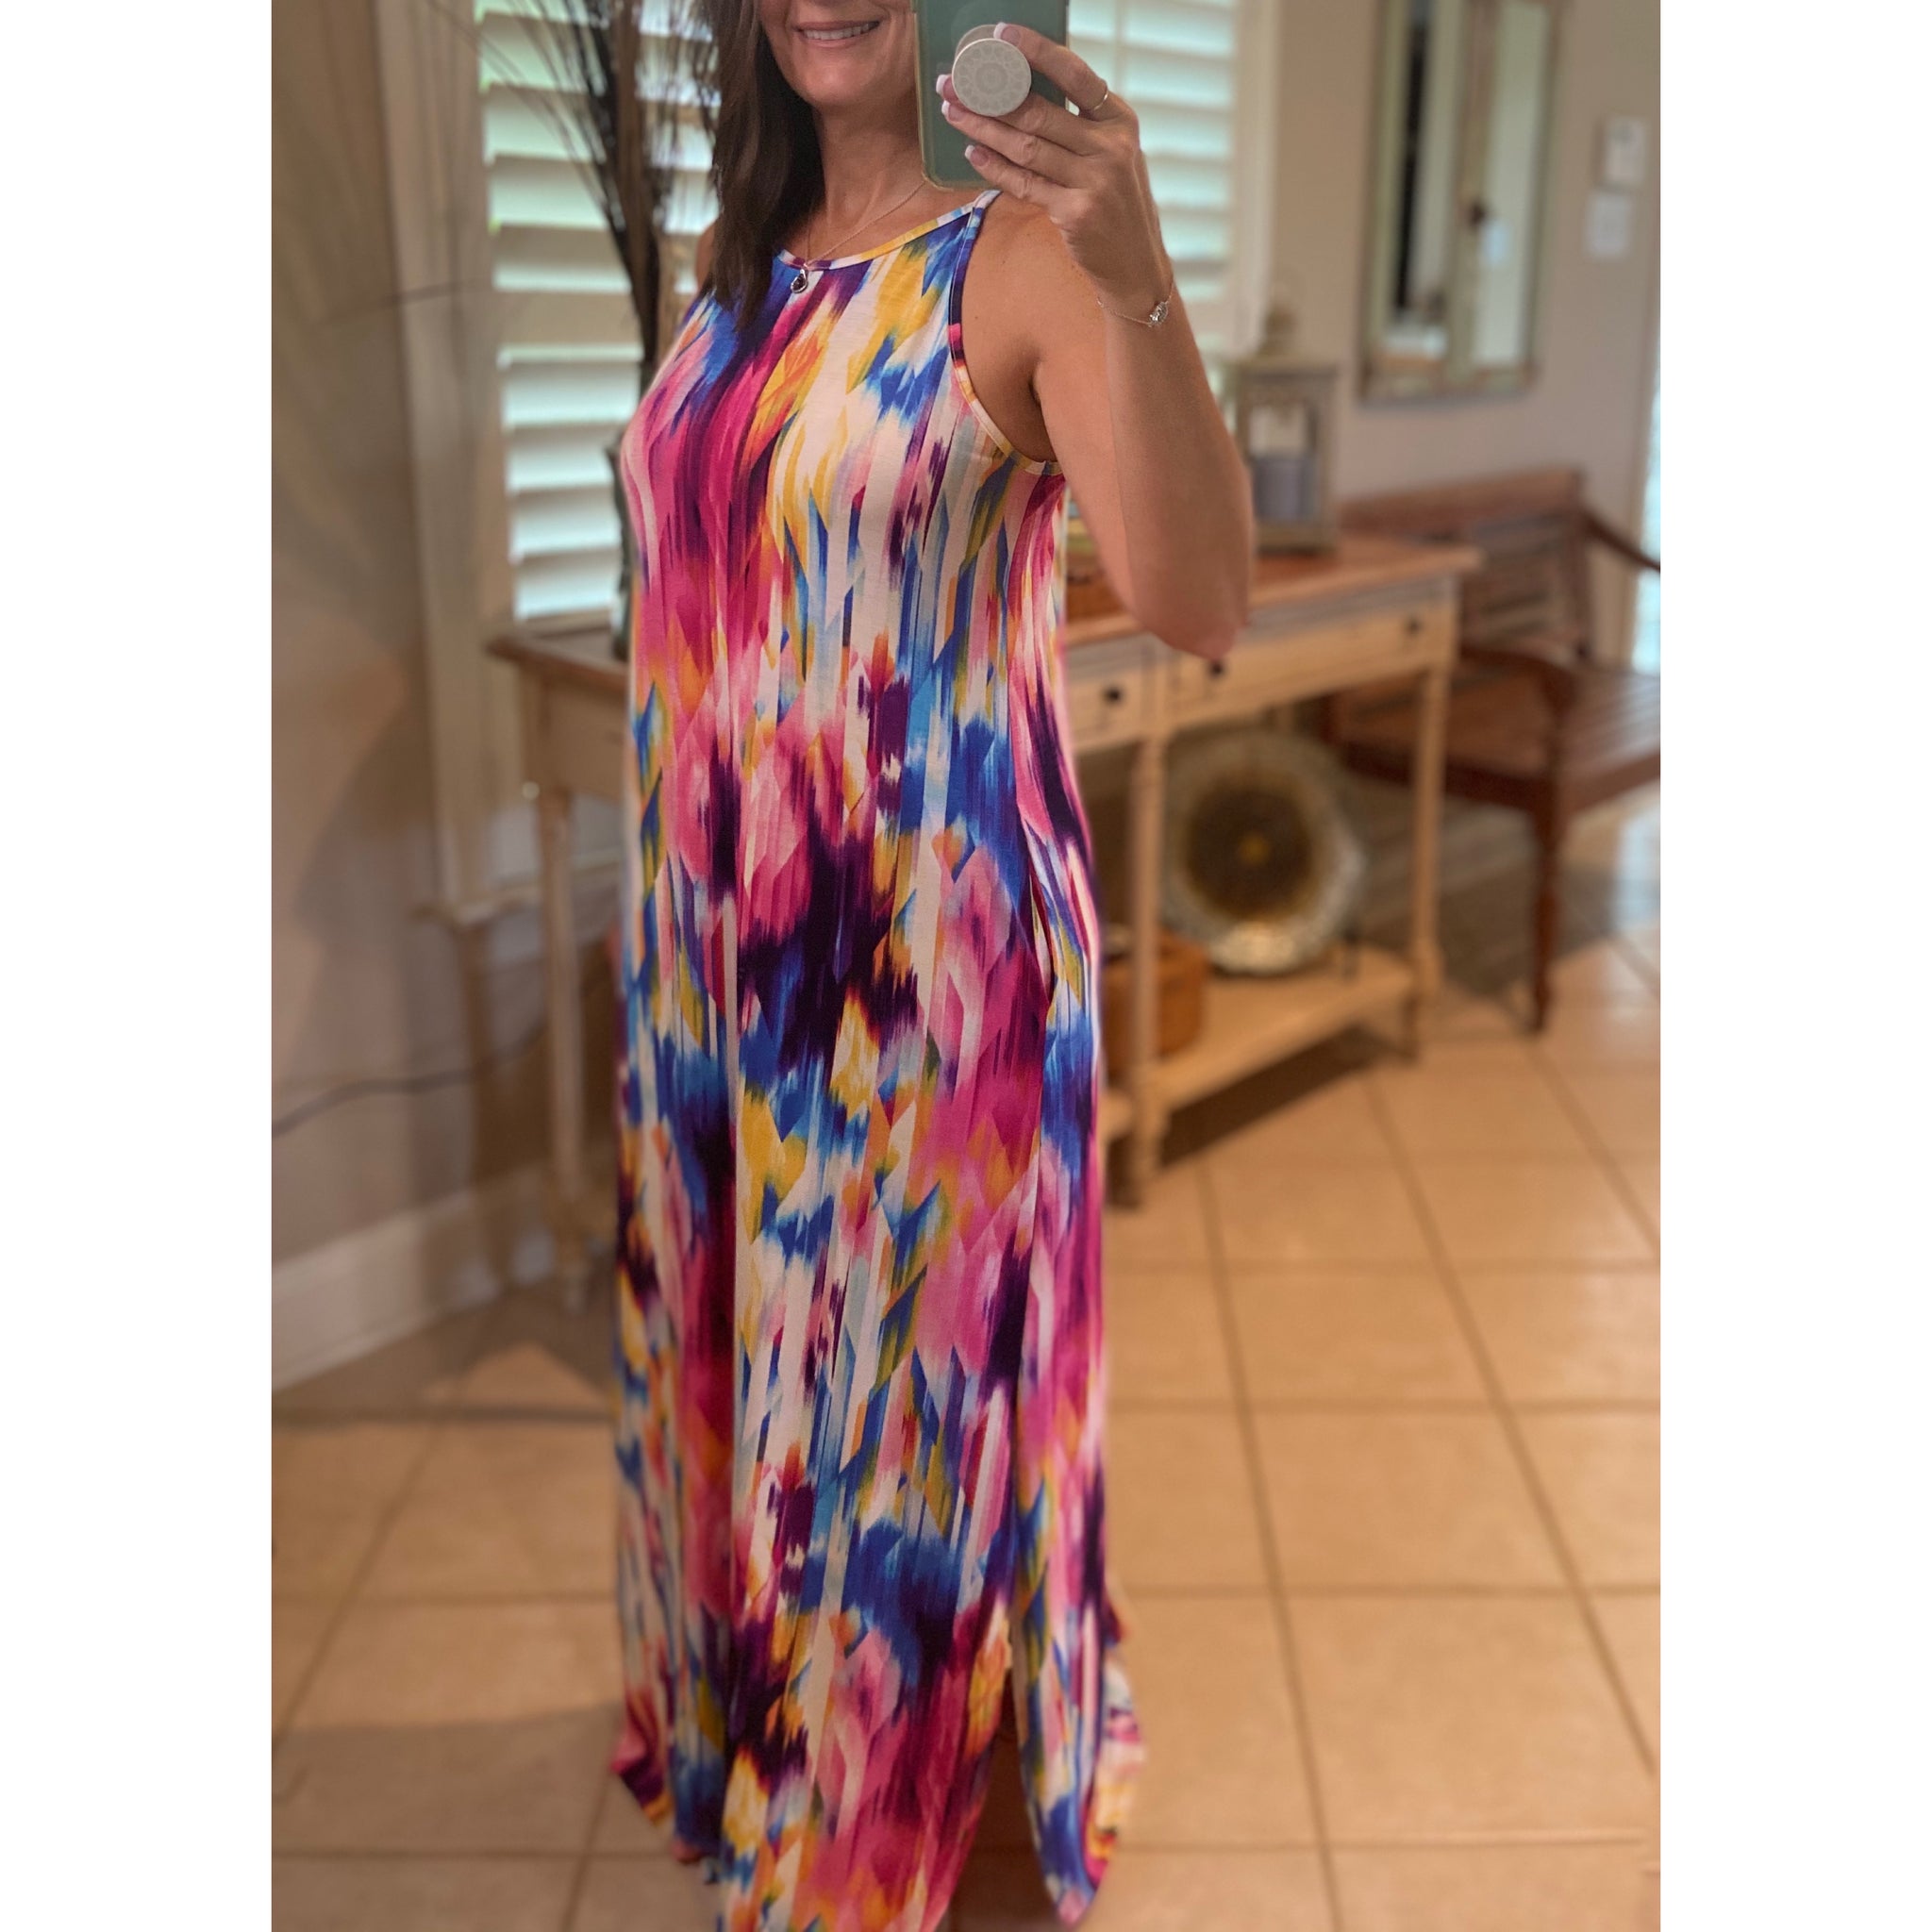 “All the Colors of the Rainbow” Vibrant Tie Dye Scoop Neck Sleeveless Tank Side Pockets Long Maxi Dress Multi